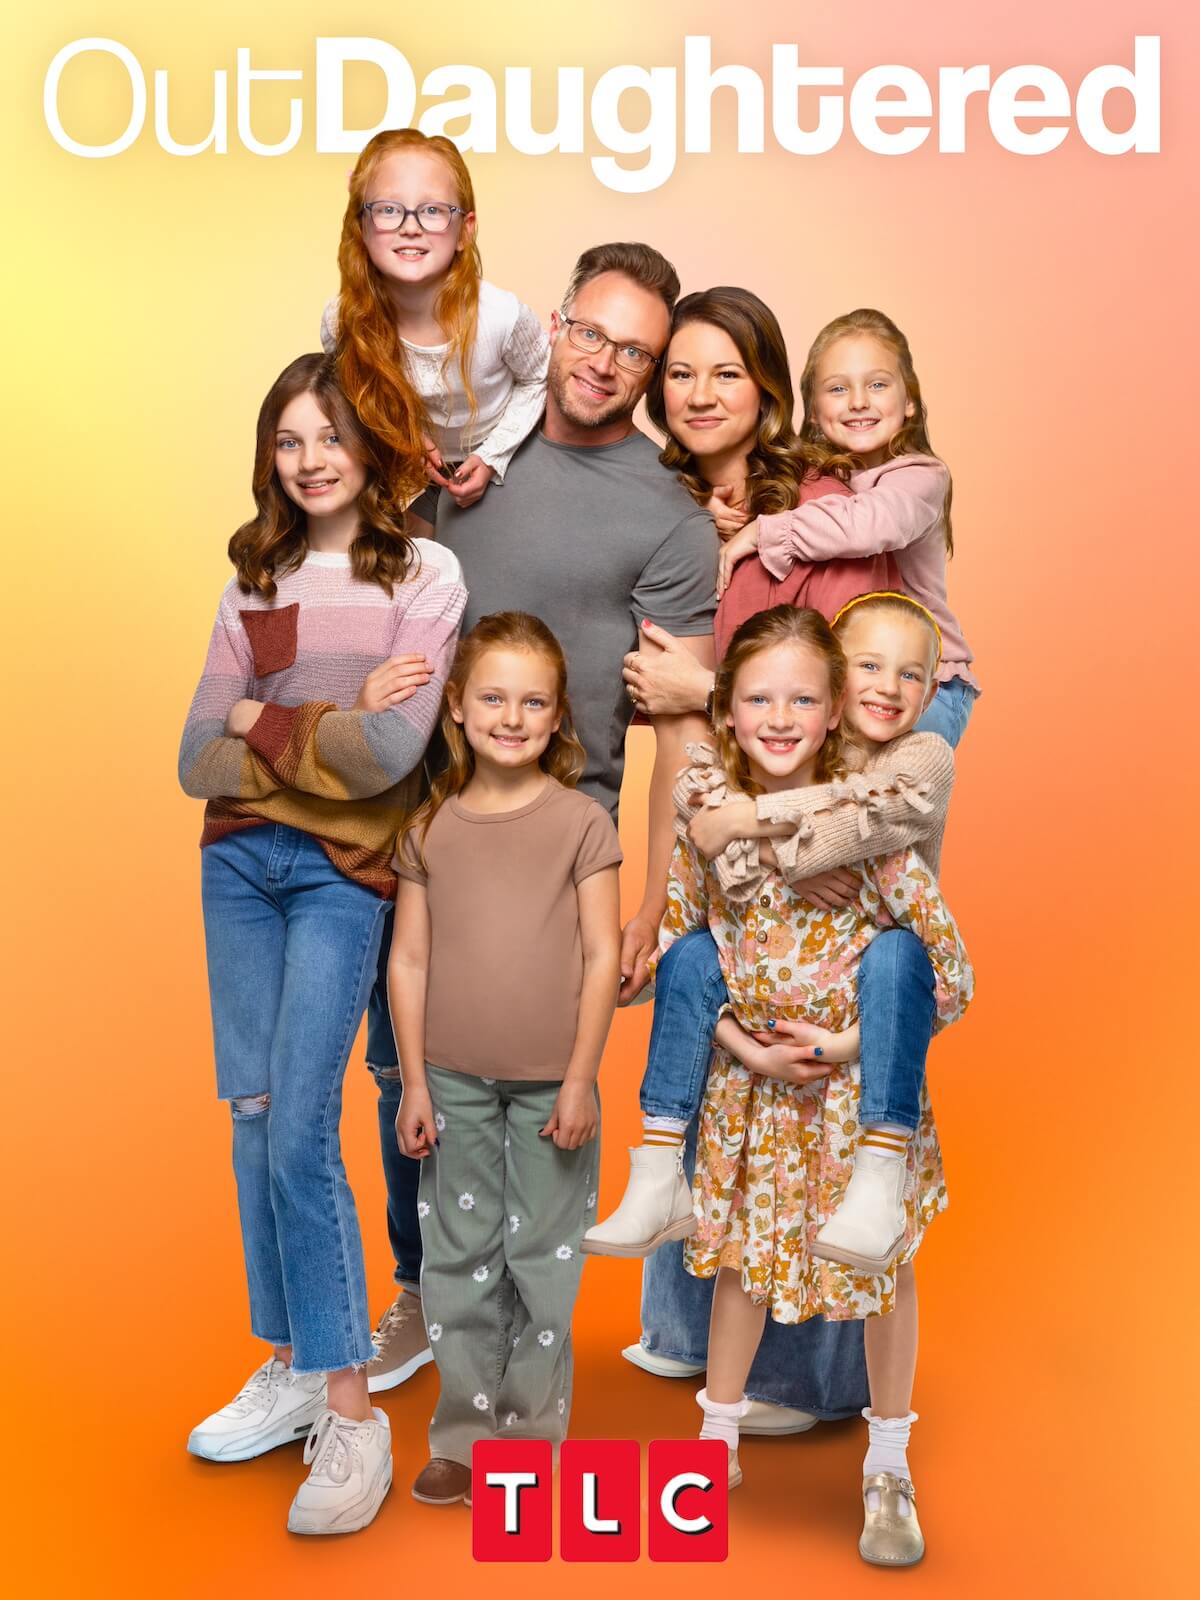 Key art for 'OutDaughtered' Season 10 featuring the Busby family